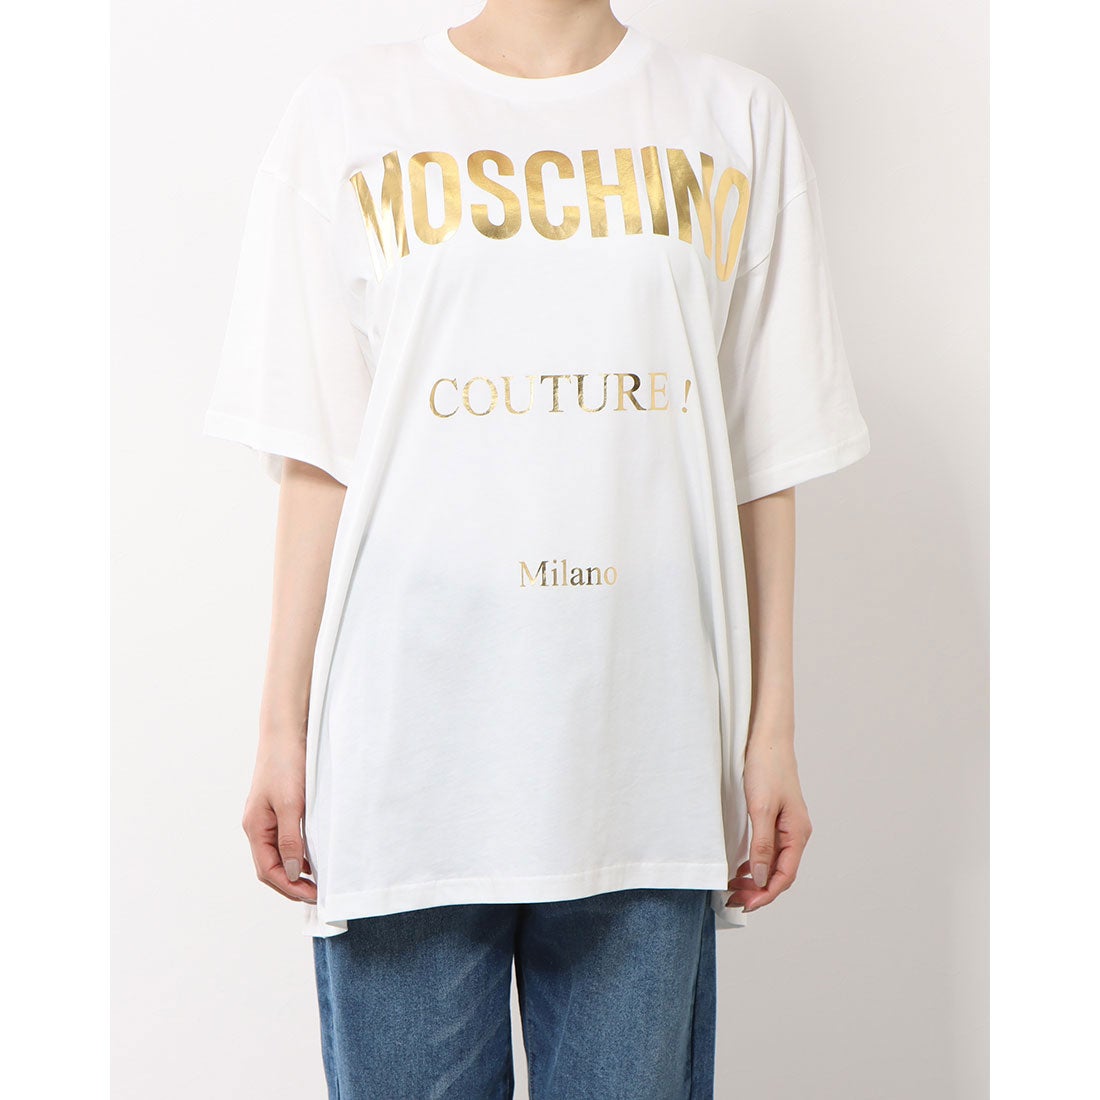 MOSCHINO COUTURE!　Tシャツ　モスキーノ　新品　キッズ　90　赤